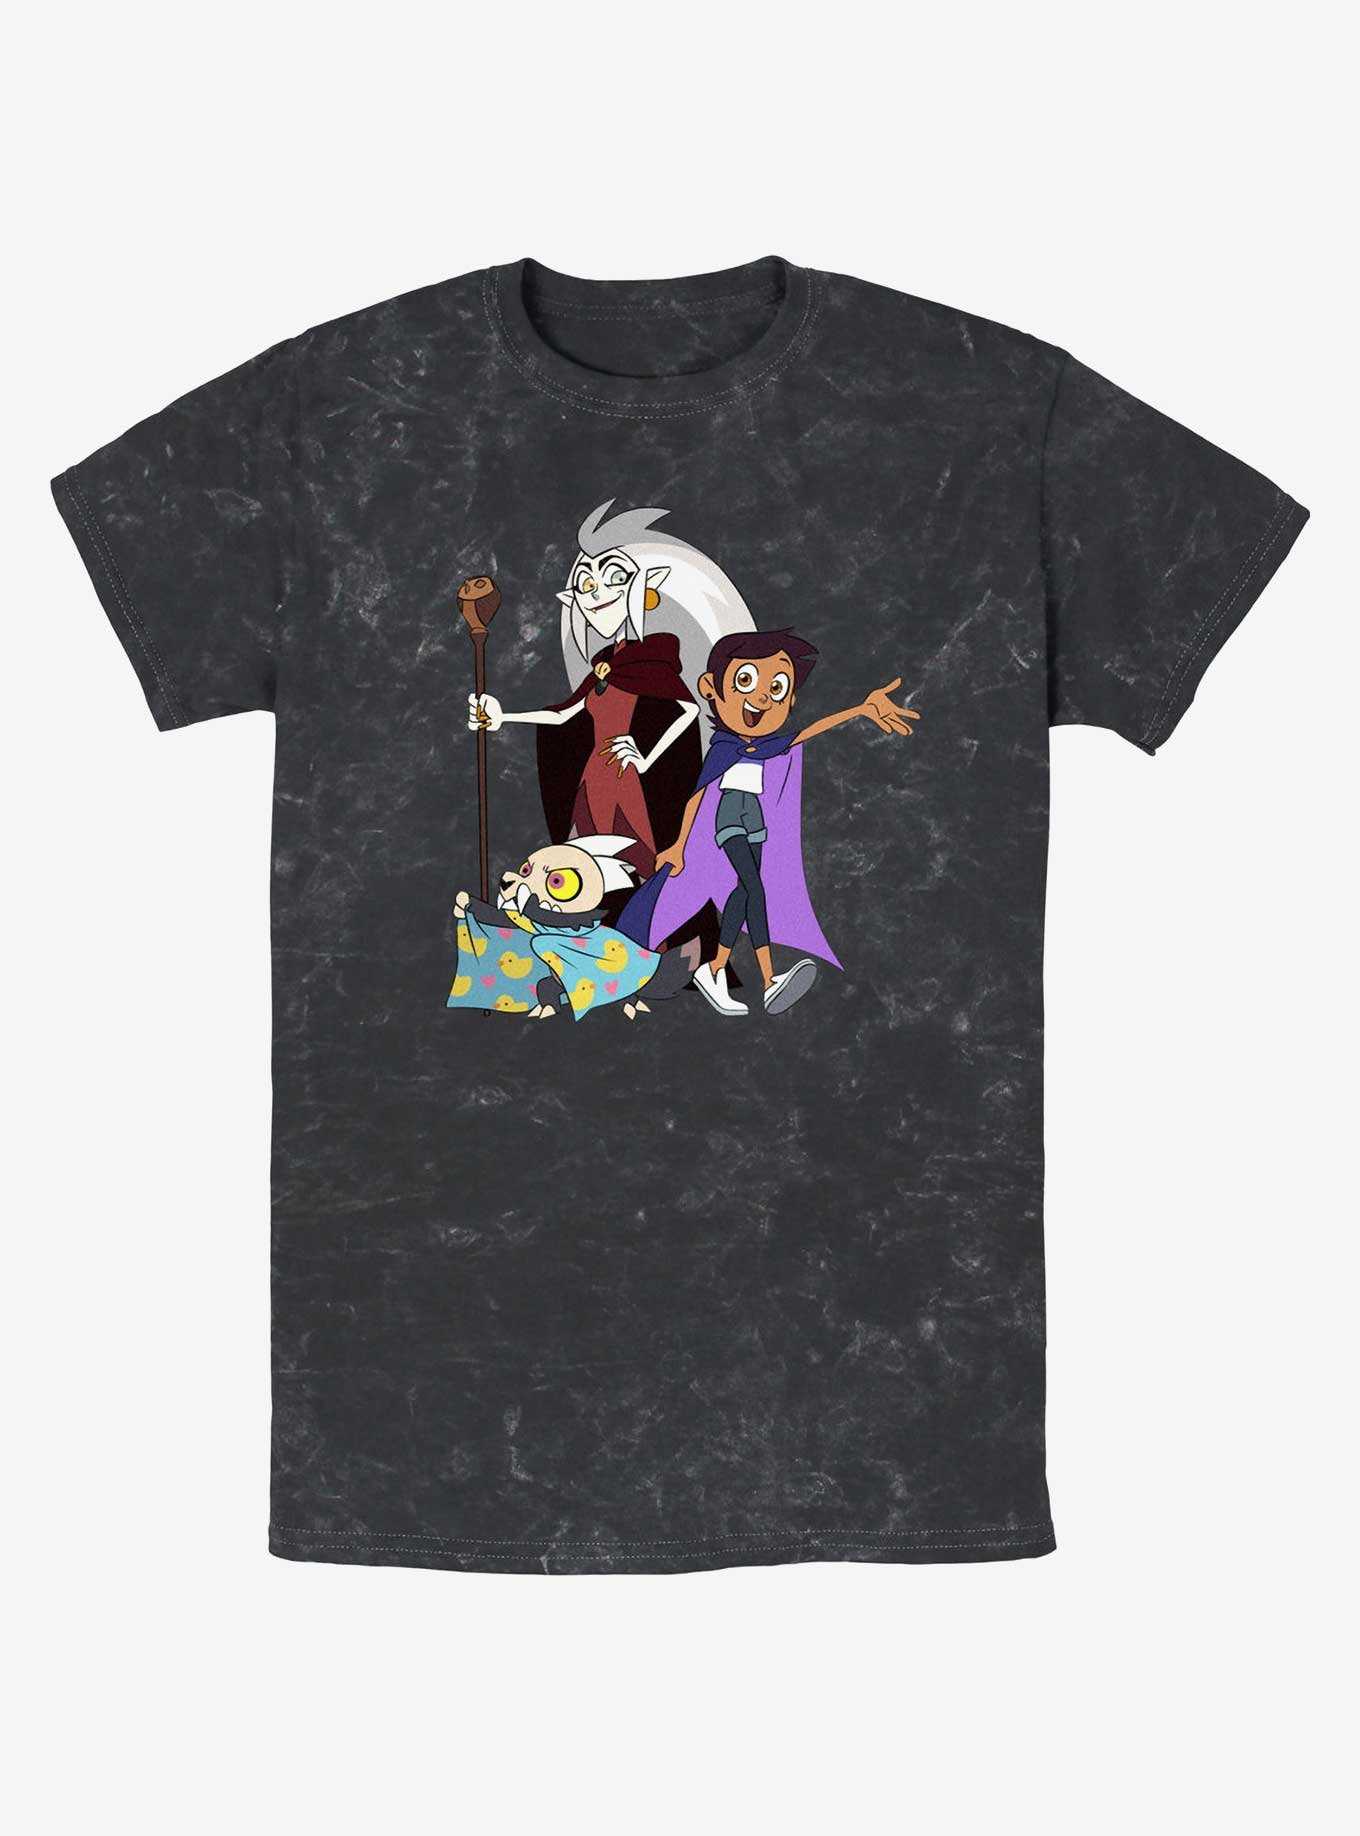 Disney The Owl House Eda Clawthorne, Luz Noceda, and King Mineral Wash T-Shirt, , hi-res